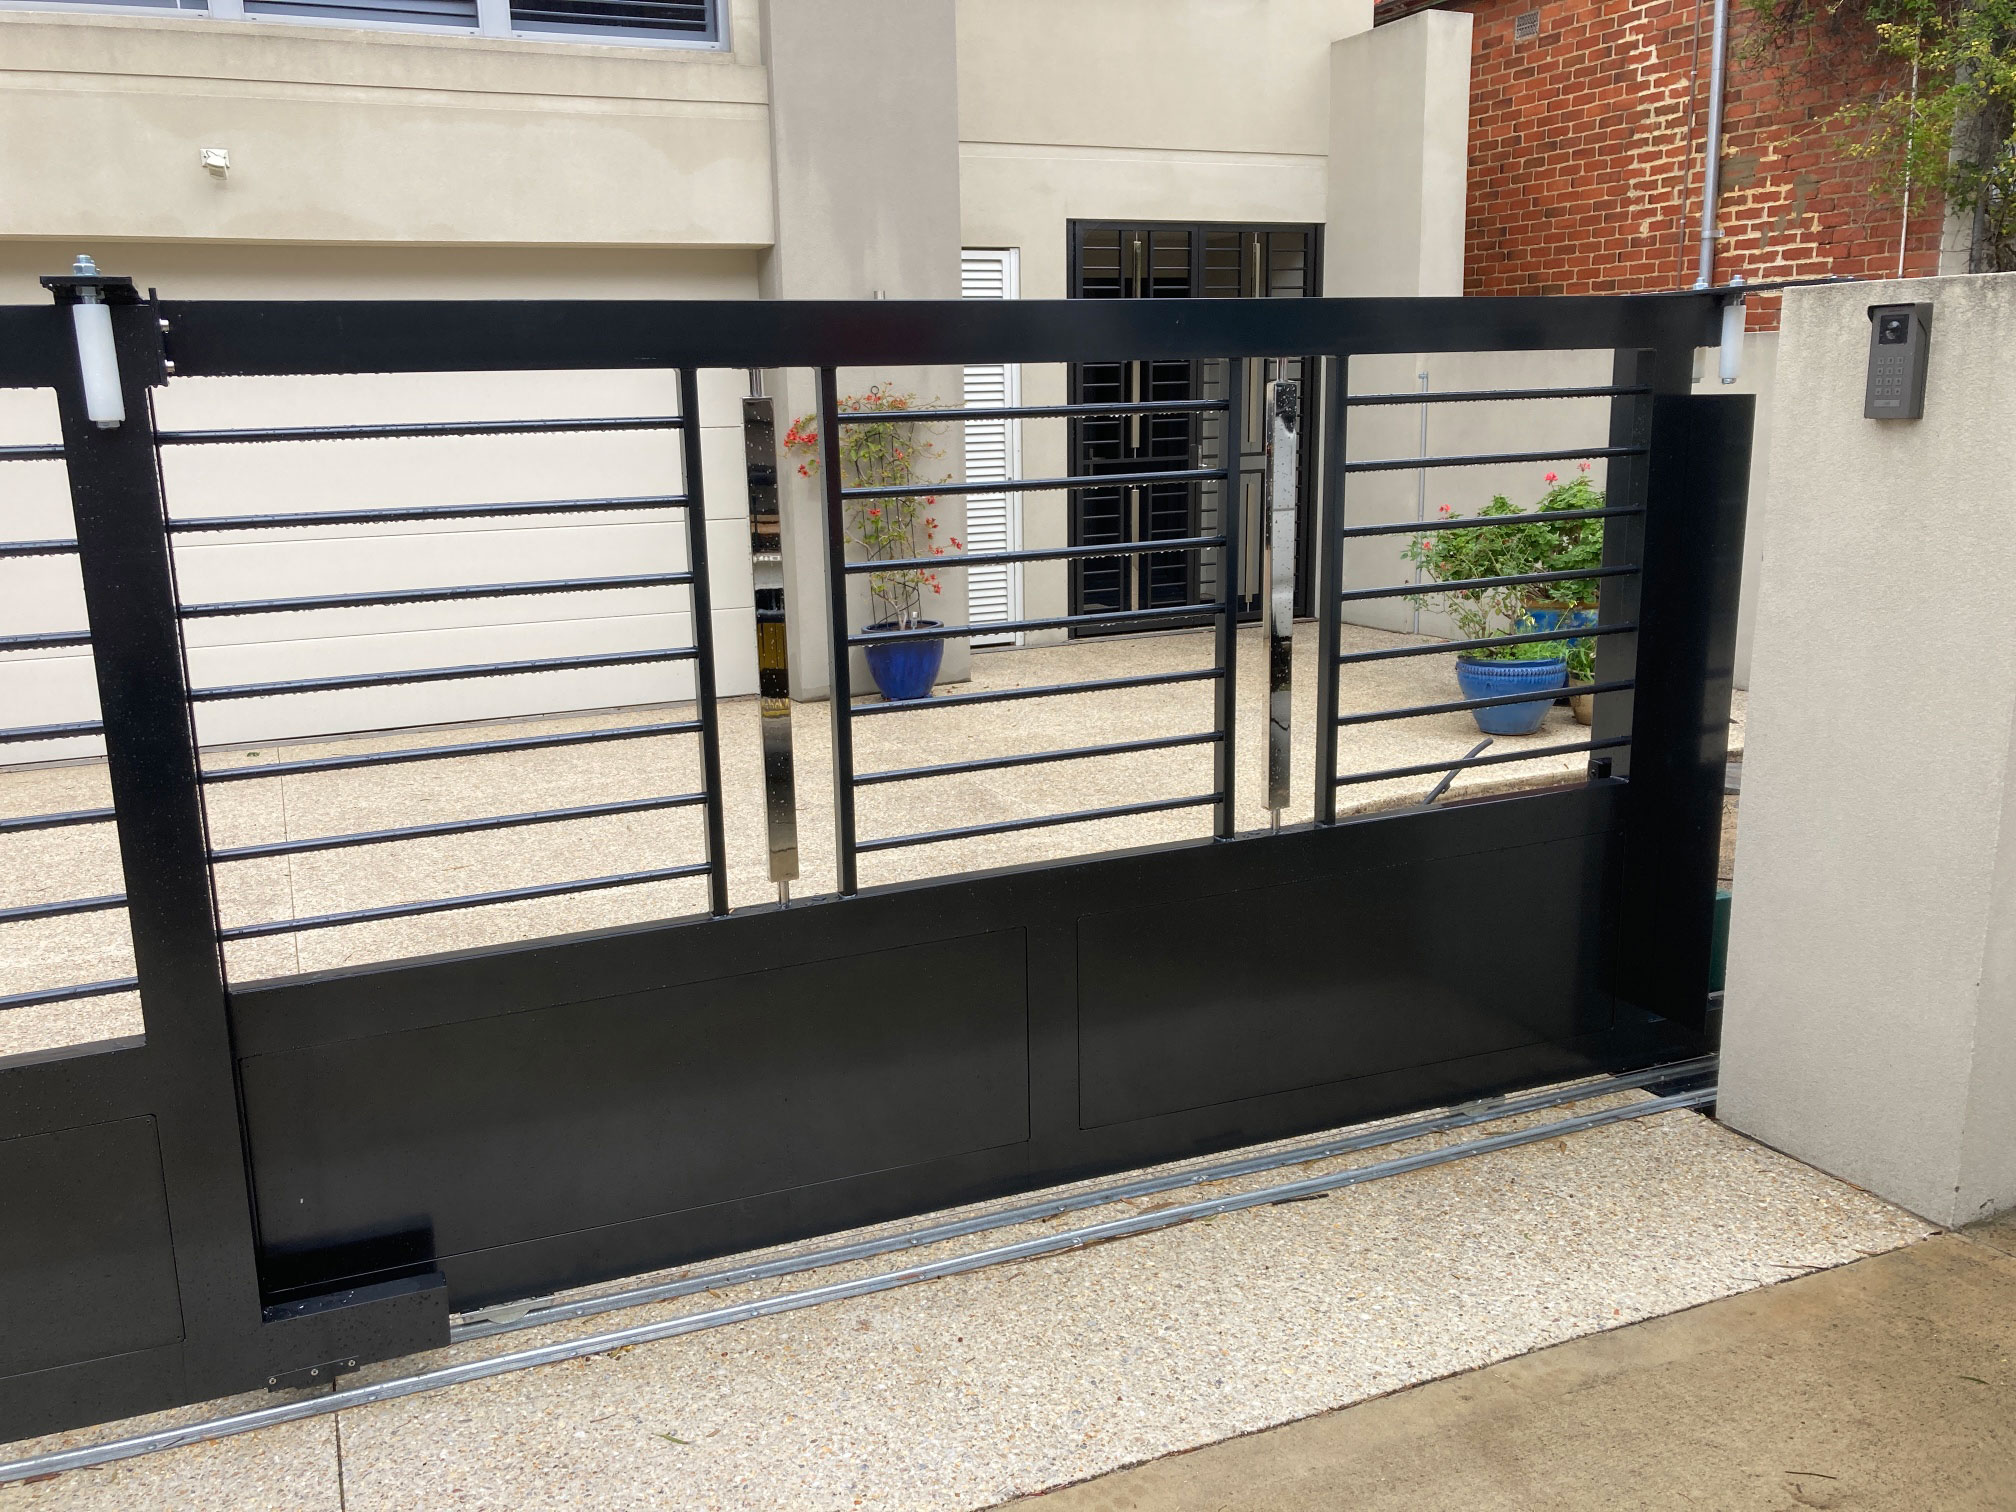 Custom Aluminium & Stainless Steel Electric Telescopic Vehicle Gate. Constructed of 19od Round Aluminium Horizontal Tube& Hi Polished Stainless Steel 50 x 25 Verticals. Aluminium Powdercoated in Black Onyx. Automated with the Centsys D5 Evo Low Voltage Gate Motor Kit. & a Fermaz Video Intercom upgraded with Phone Capabilities.Contact Western Automate today for a free, no-obligation quote - 08 6499 2812 | sales@westernautomate.com.au | https://westernautomate.com.au